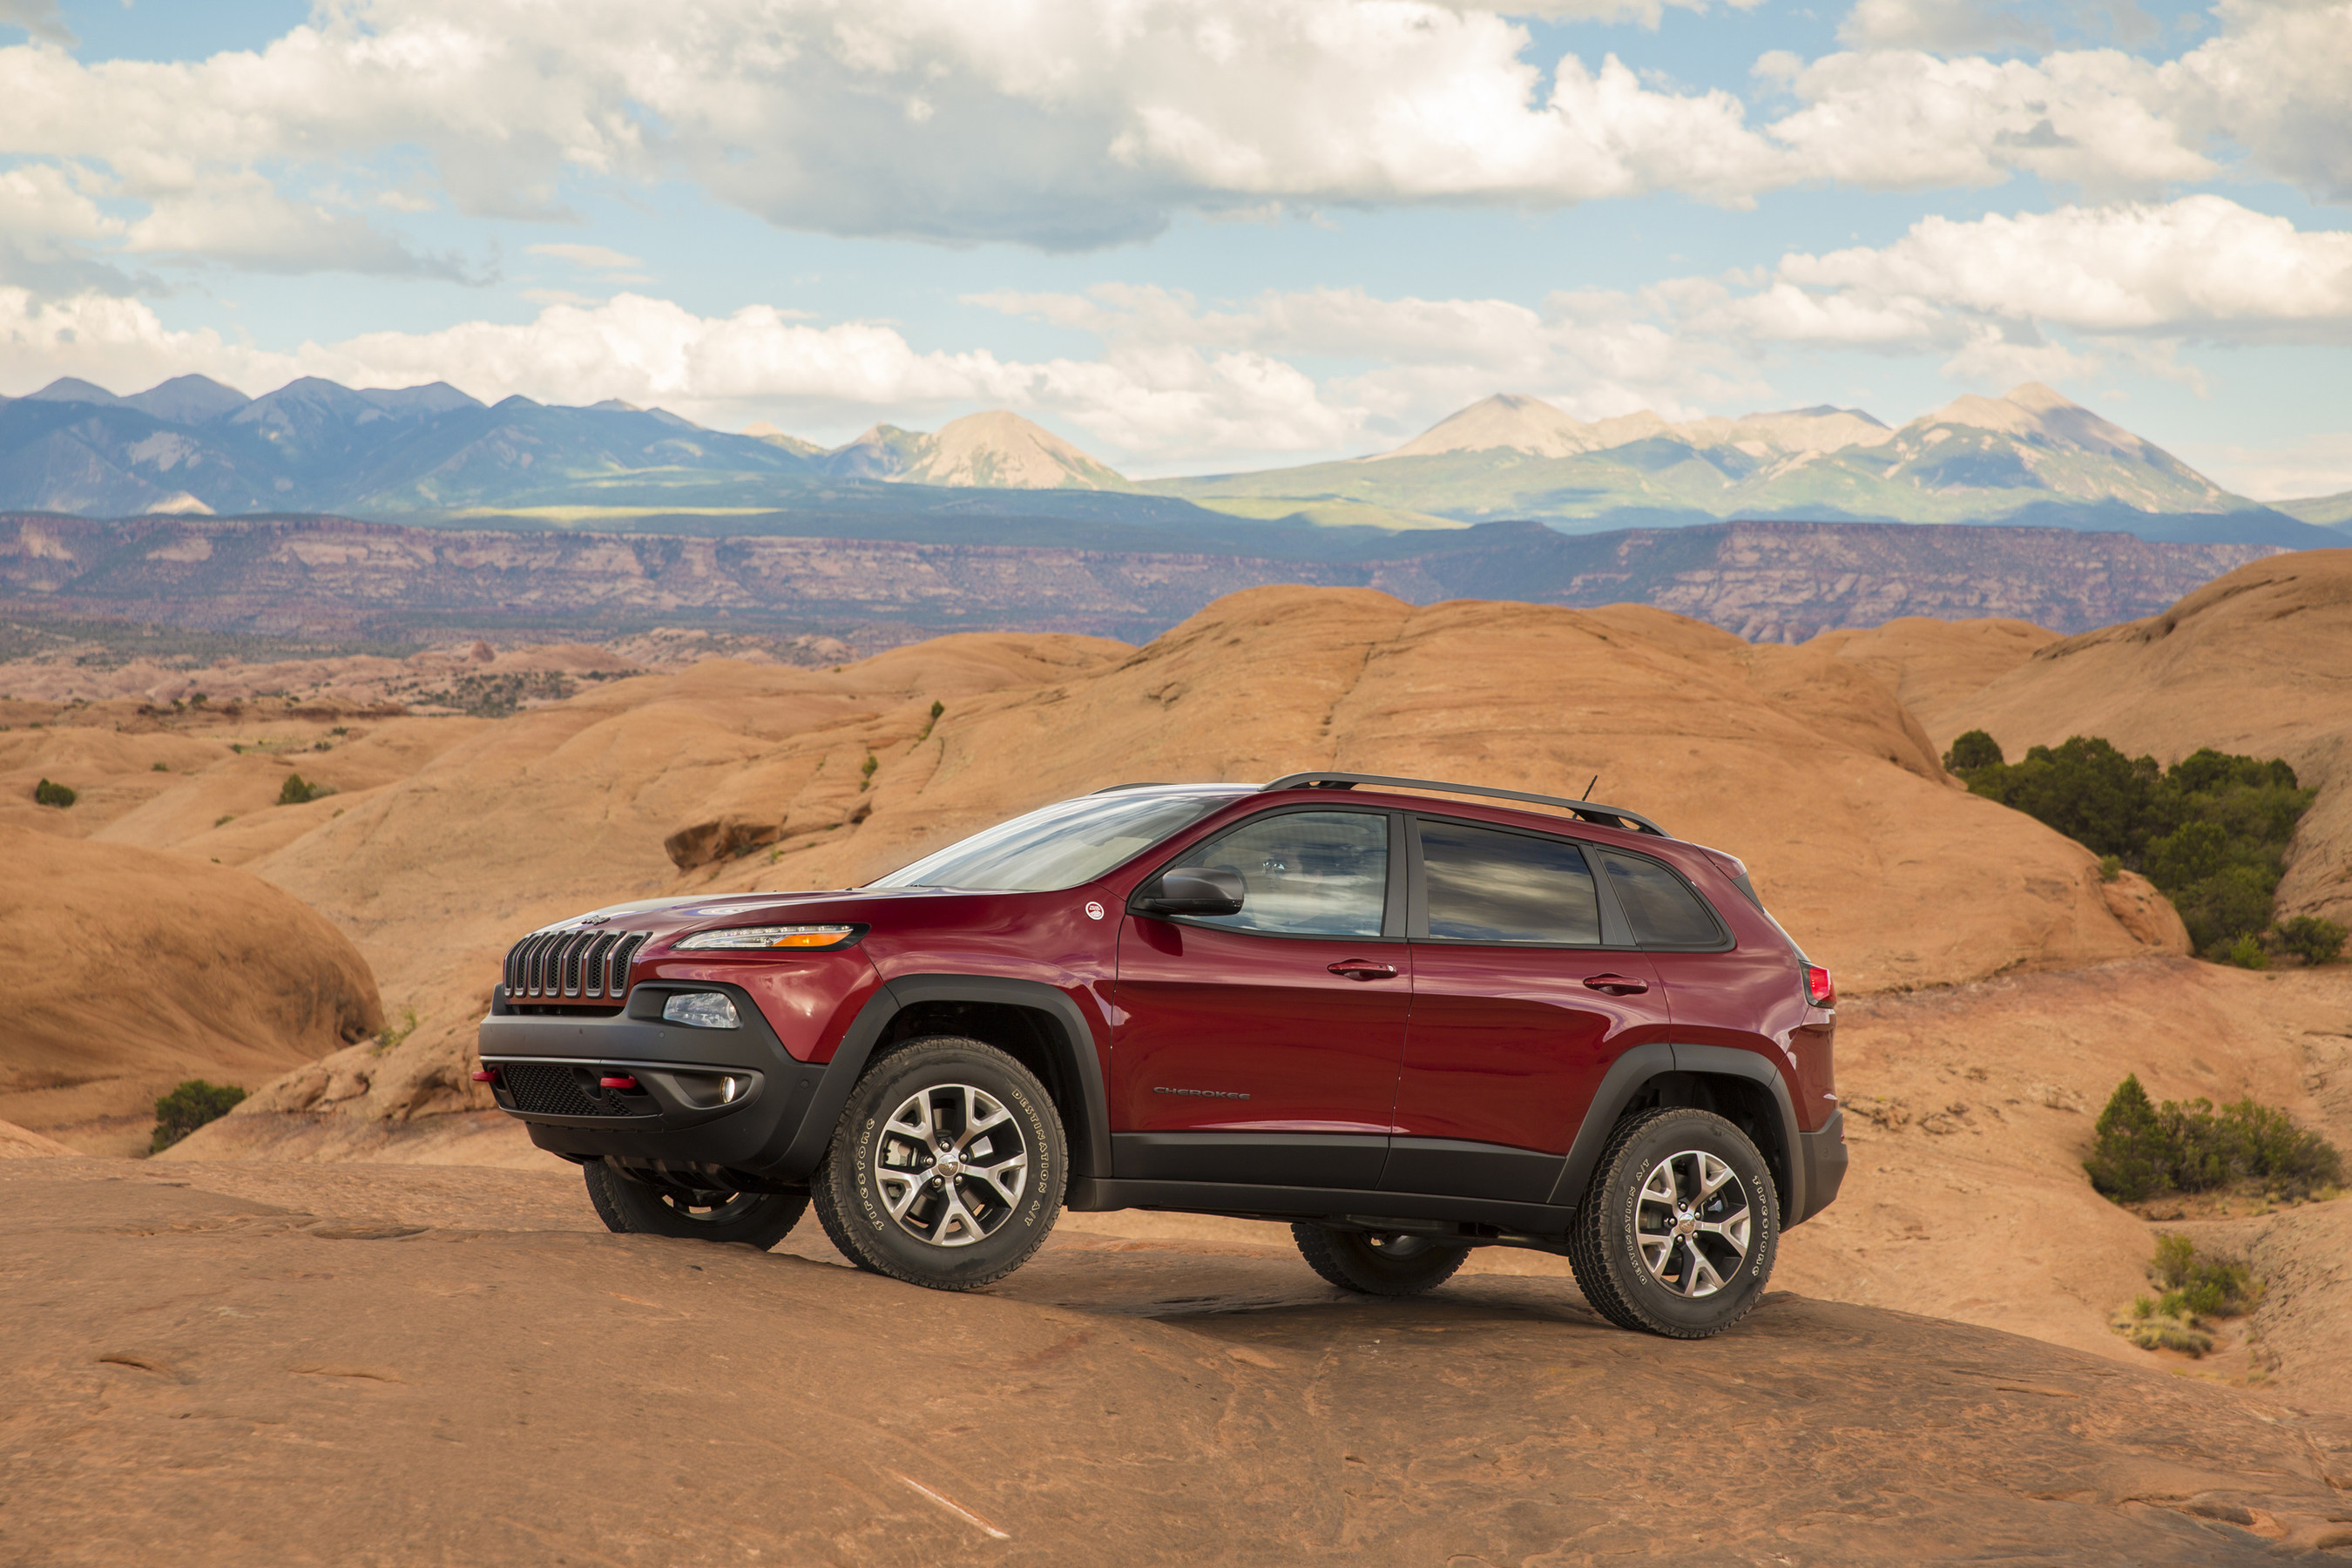 2015 Jeep Cherokee named Four Wheeler of the Year